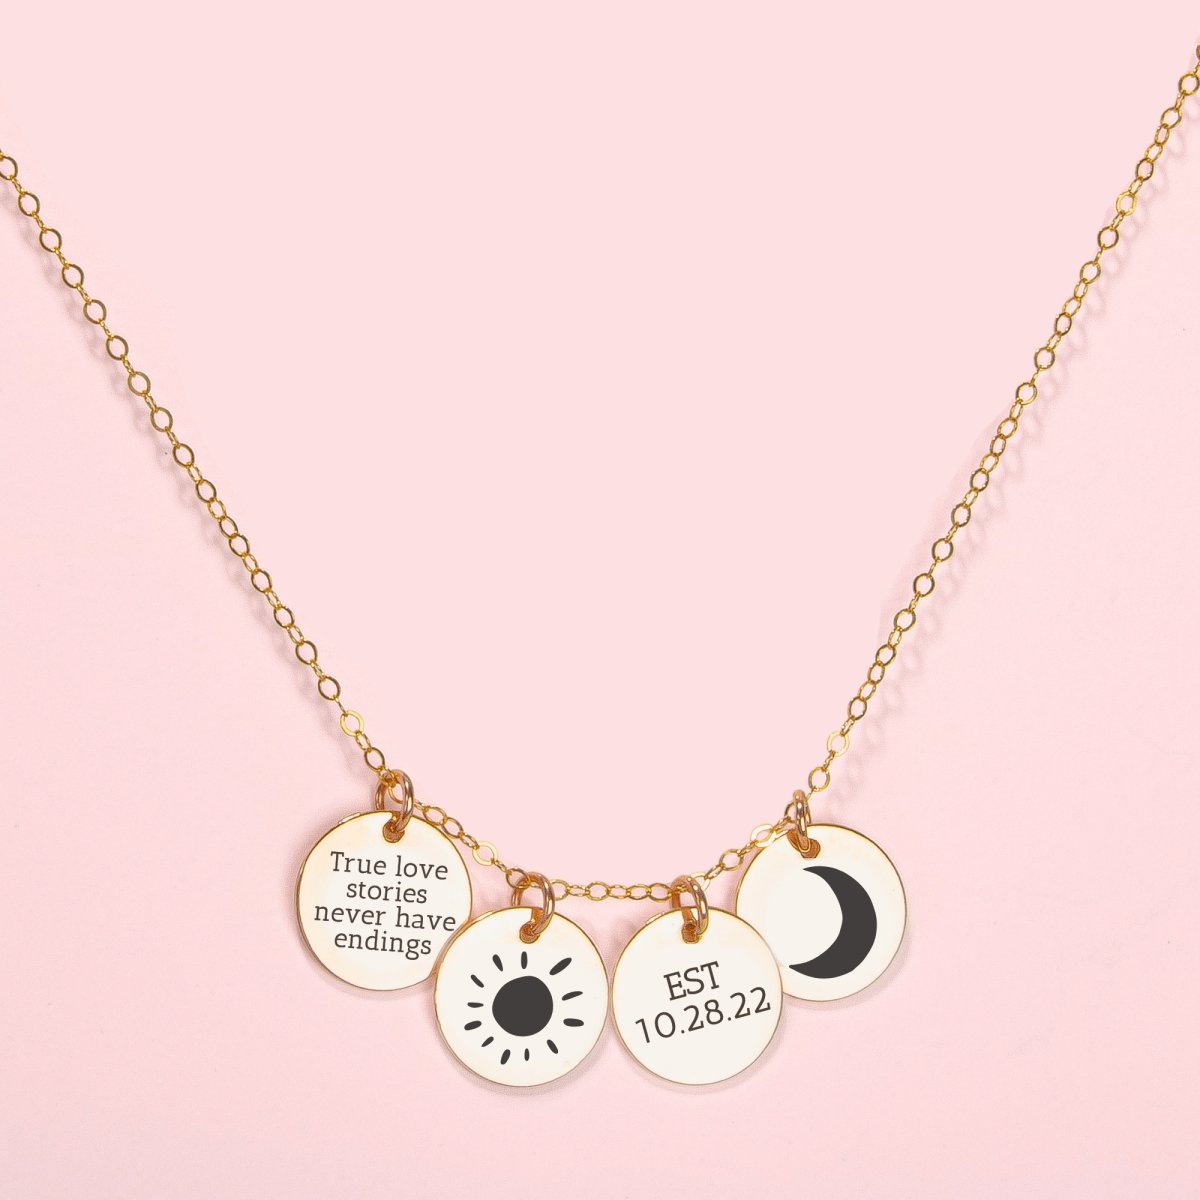 The Ultimate Custom Disc Necklace - Melanie Golden Jewelry - bridesmaid, custom, disc necklaces, Engraved Jewelry, love, motherhood, necklace, necklaces, personalized, personalized necklace, personalized1, VALENTINES, wedding, wedding party